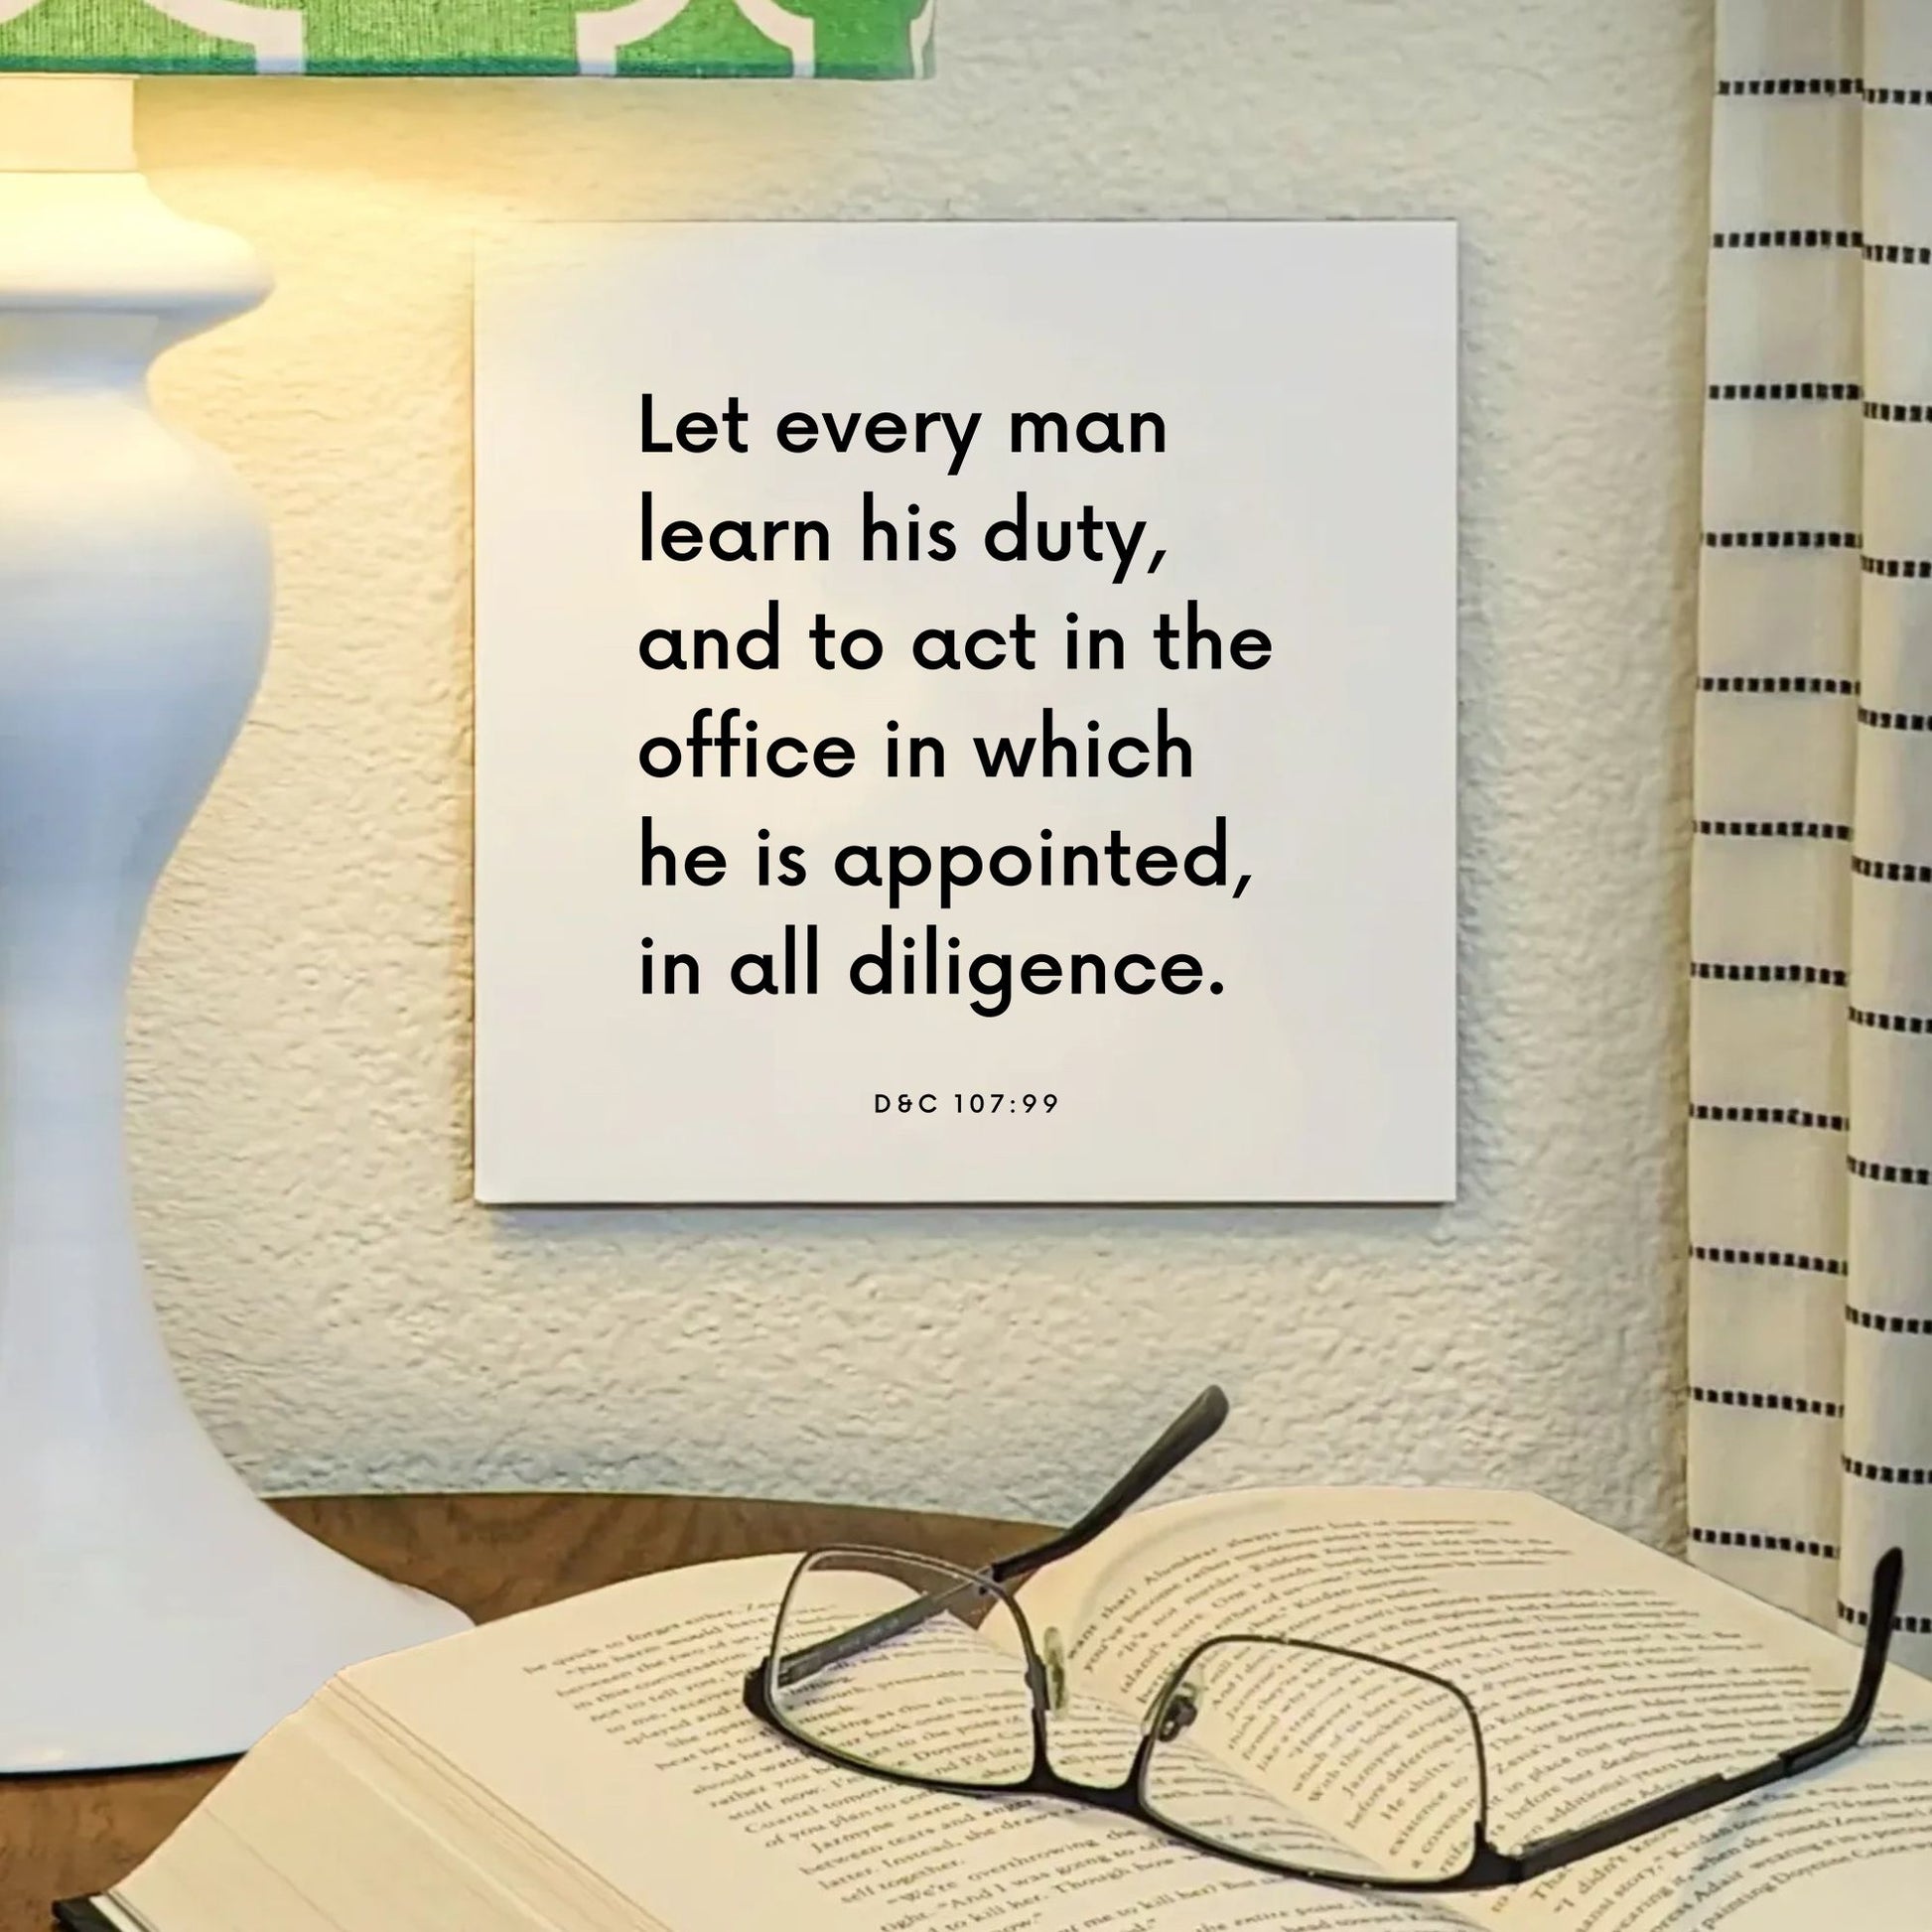 Lamp mouting of the scripture tile for D&C 107:99 - "Let every man learn his duty"